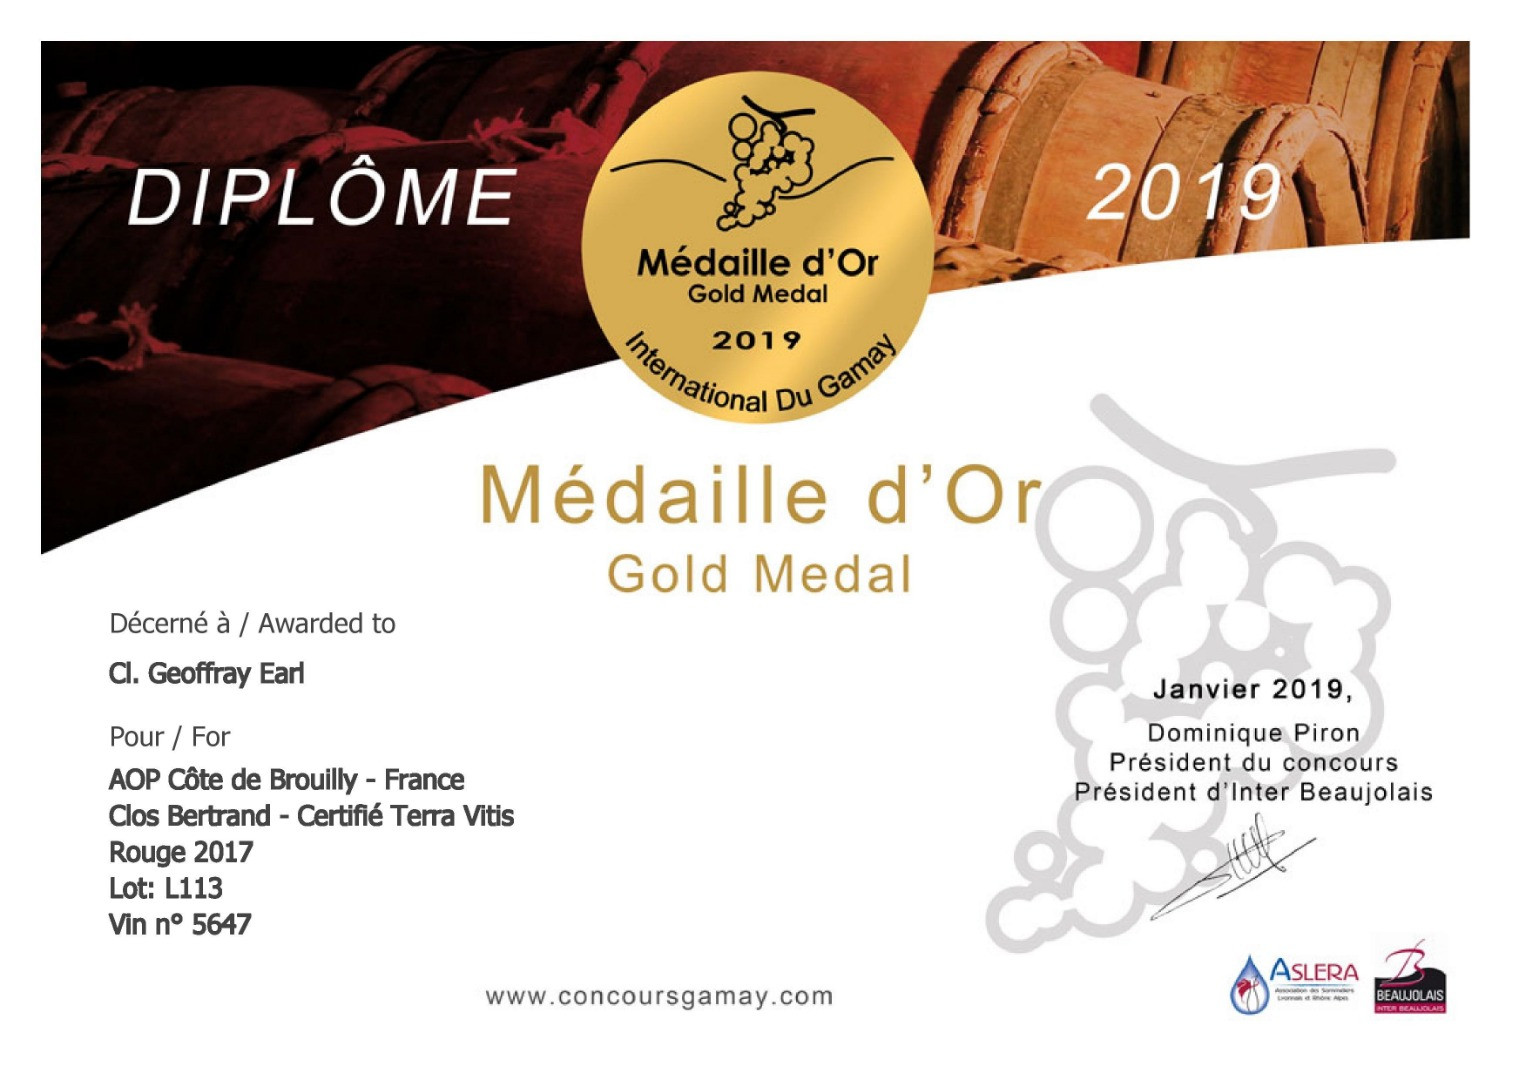 Concours International du Gamay 2019 - 2019/01